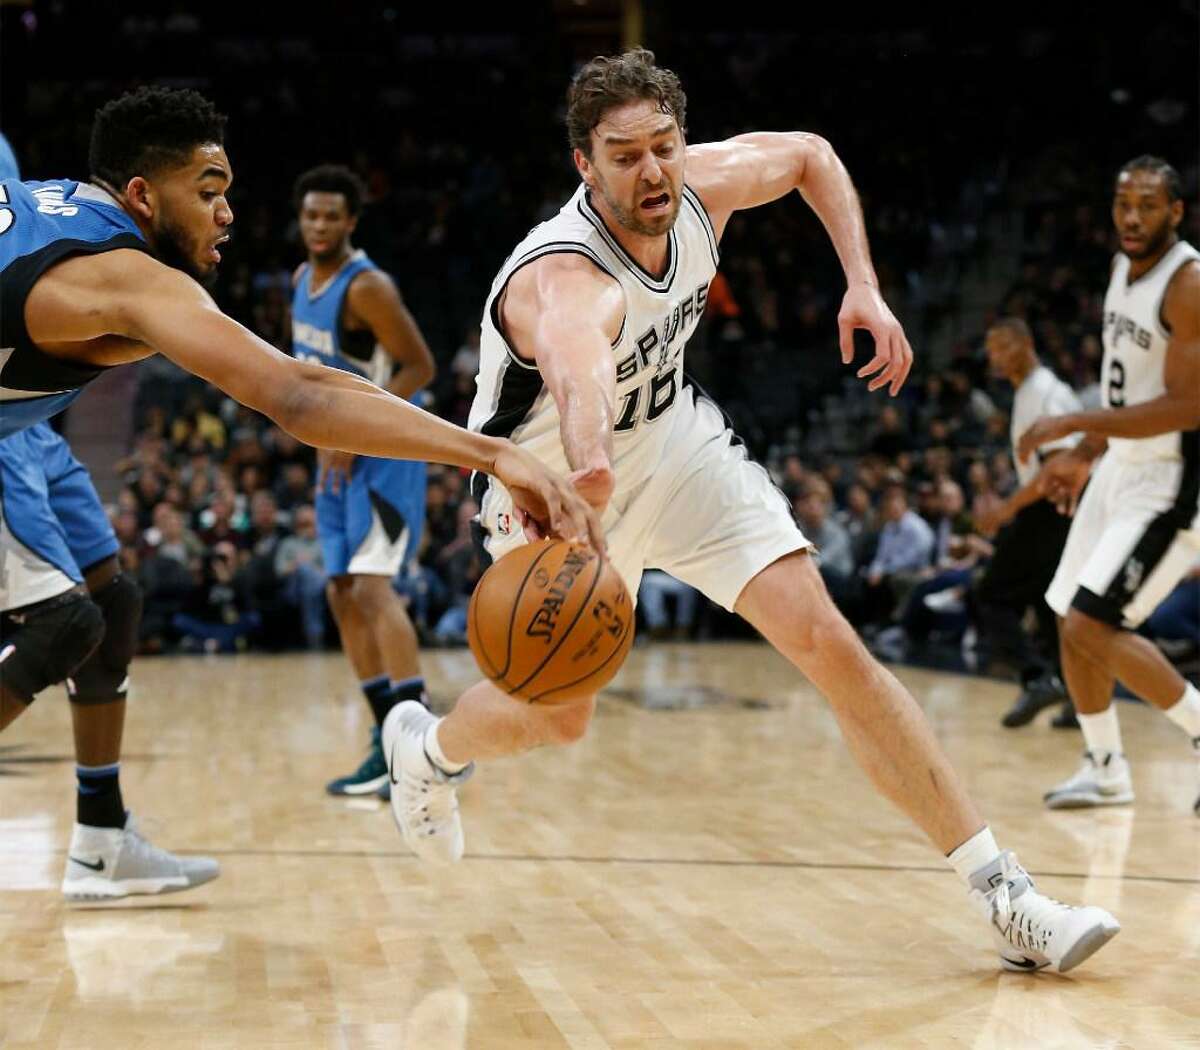 Spurs' Pau Gasol (16) fights for a loose ball against Minnesota Timberwolves' Karl-Anthony Towns (32) during their game at the AT&T Center on Tuesday, Jan. 17, 2017.